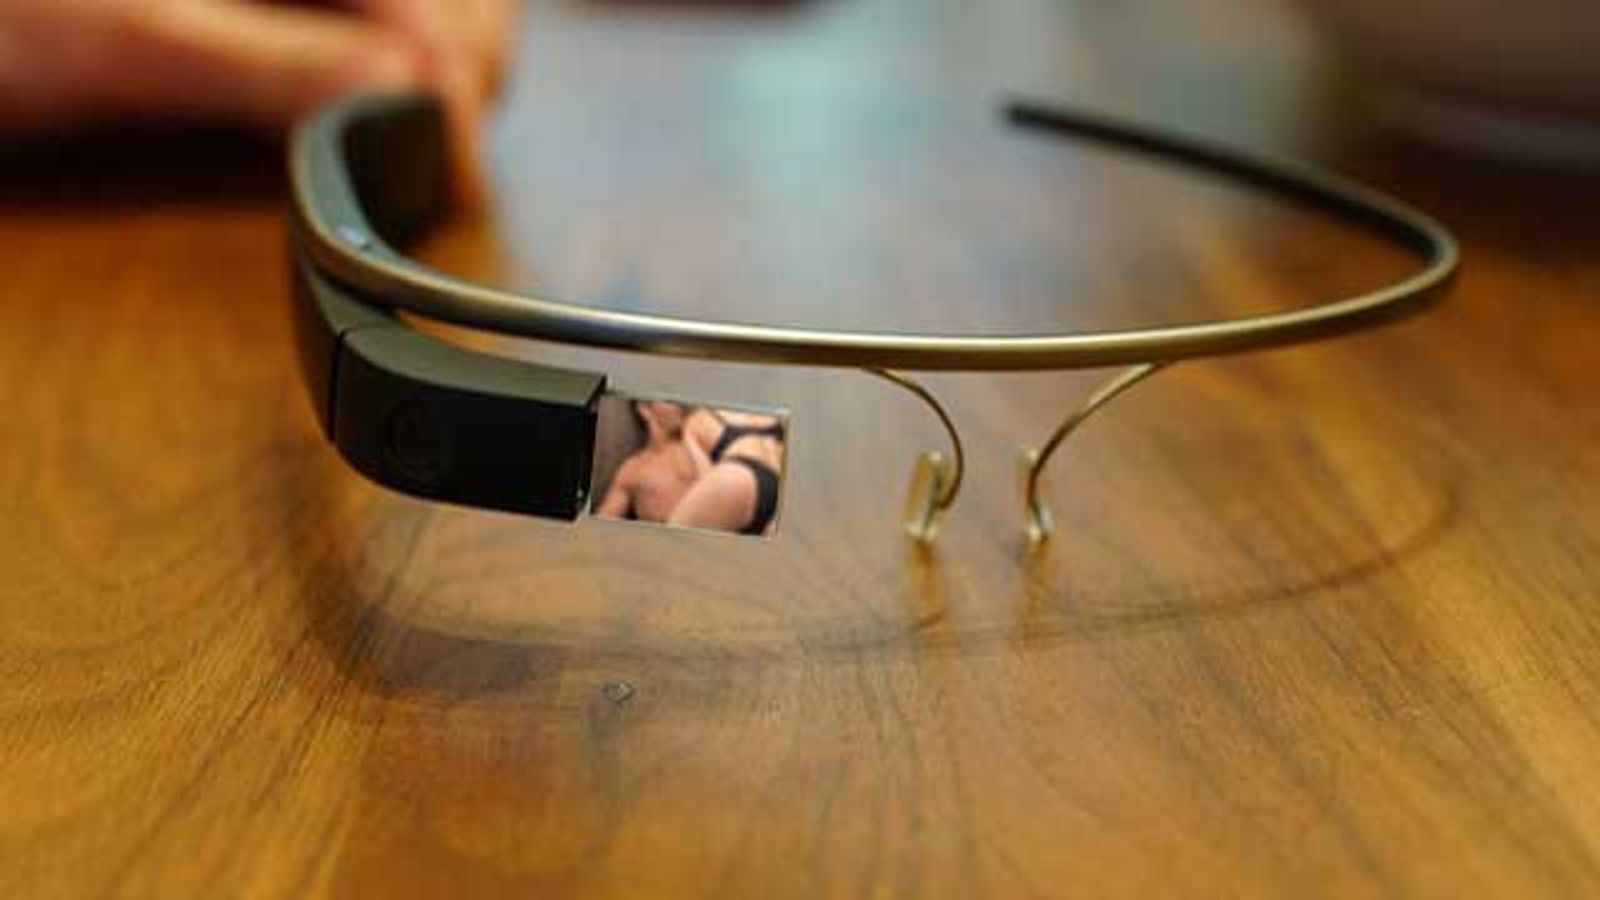 Google Glass Porn: Now You See It, Now You Don’t